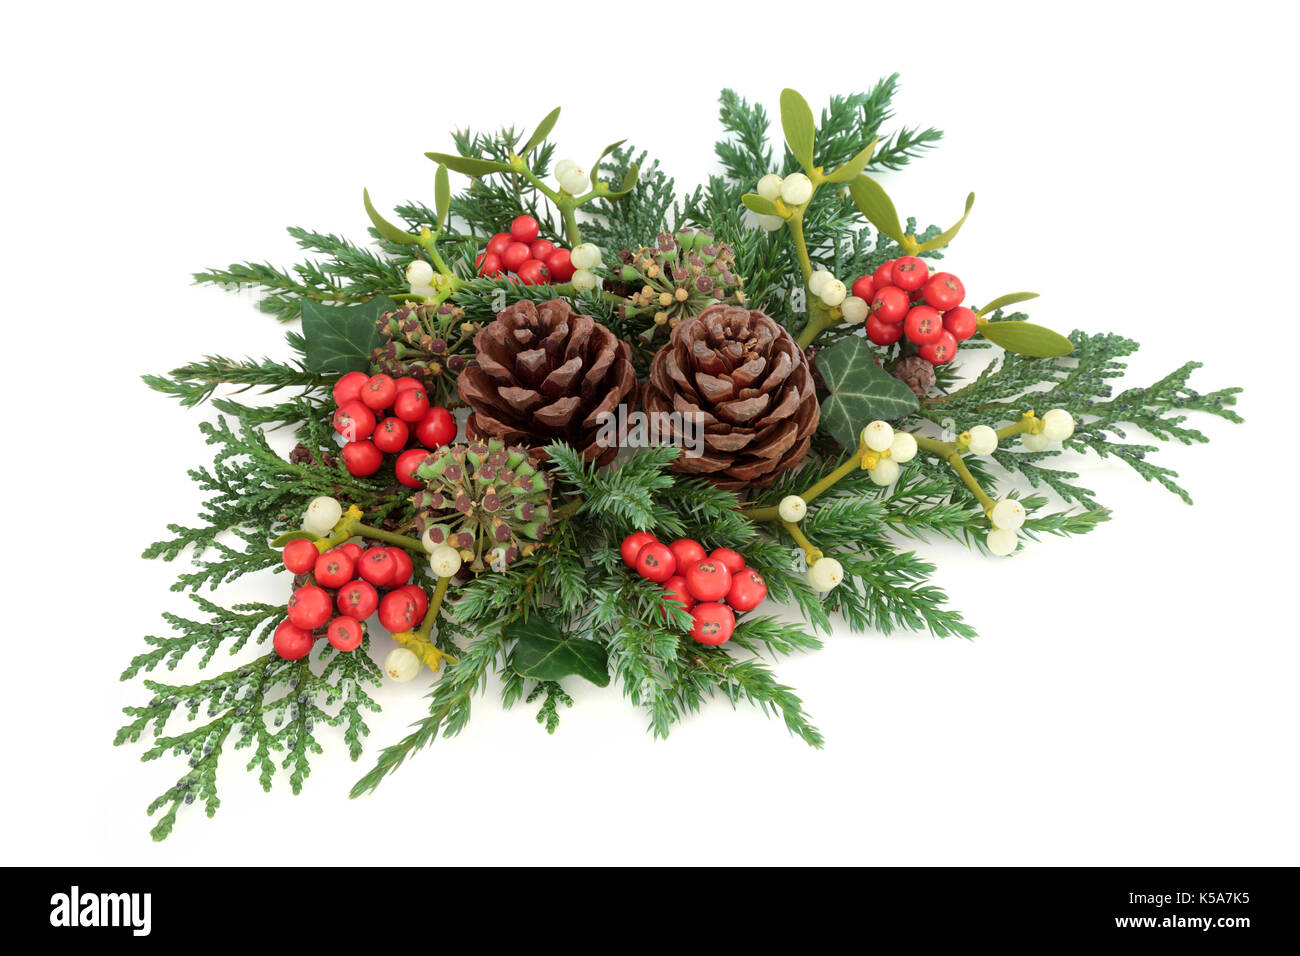 Winter and christmas holly with mistletoe, ivy, cedar, juniper and pine cones on a white background. Stock Photo